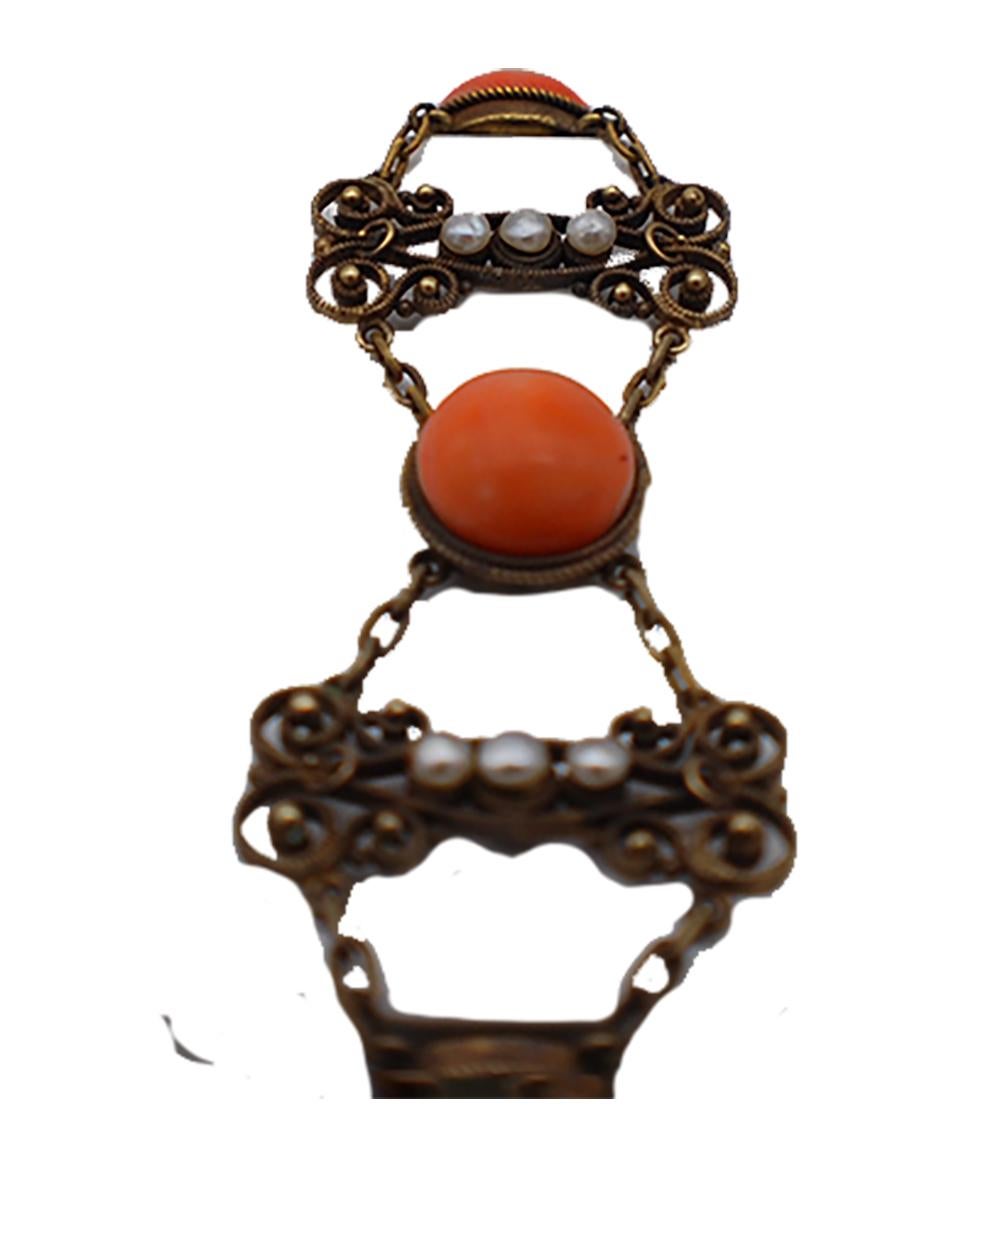 Victorian, Gold filigree style bracelet consists of 4- coral gemstones measuring 11.58 mm each and set in etched bezels. The filigree links are seperated with chain linking 3- seed pearls that measure 2.50-3.20 mm each. The end clasp feature is a